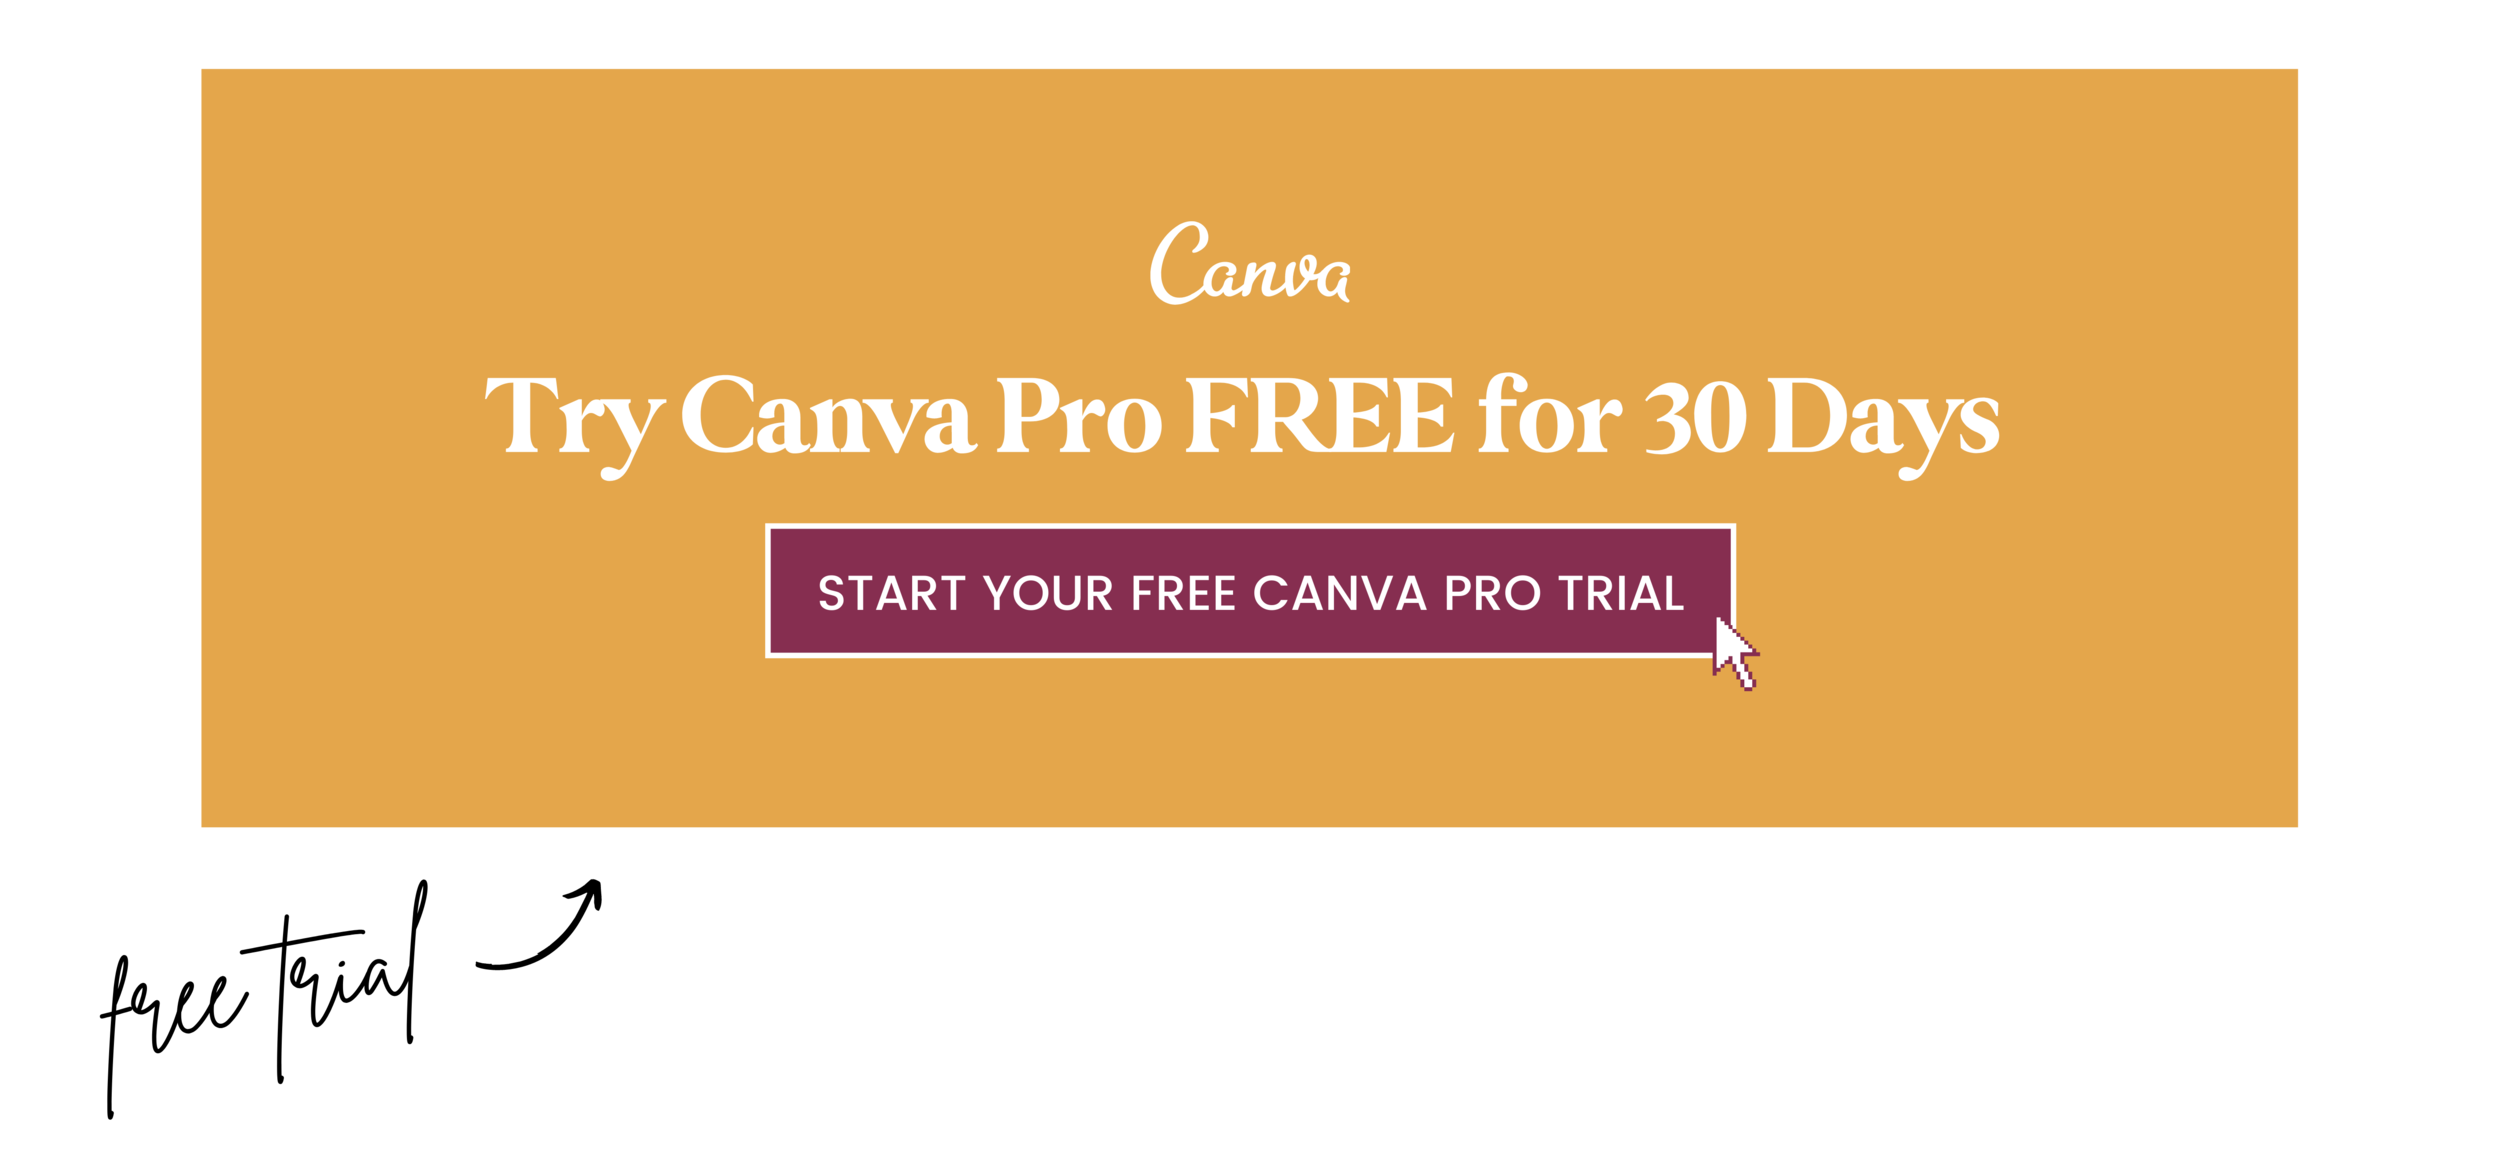 Canva Pro Review Free Trial | Fallon Travels